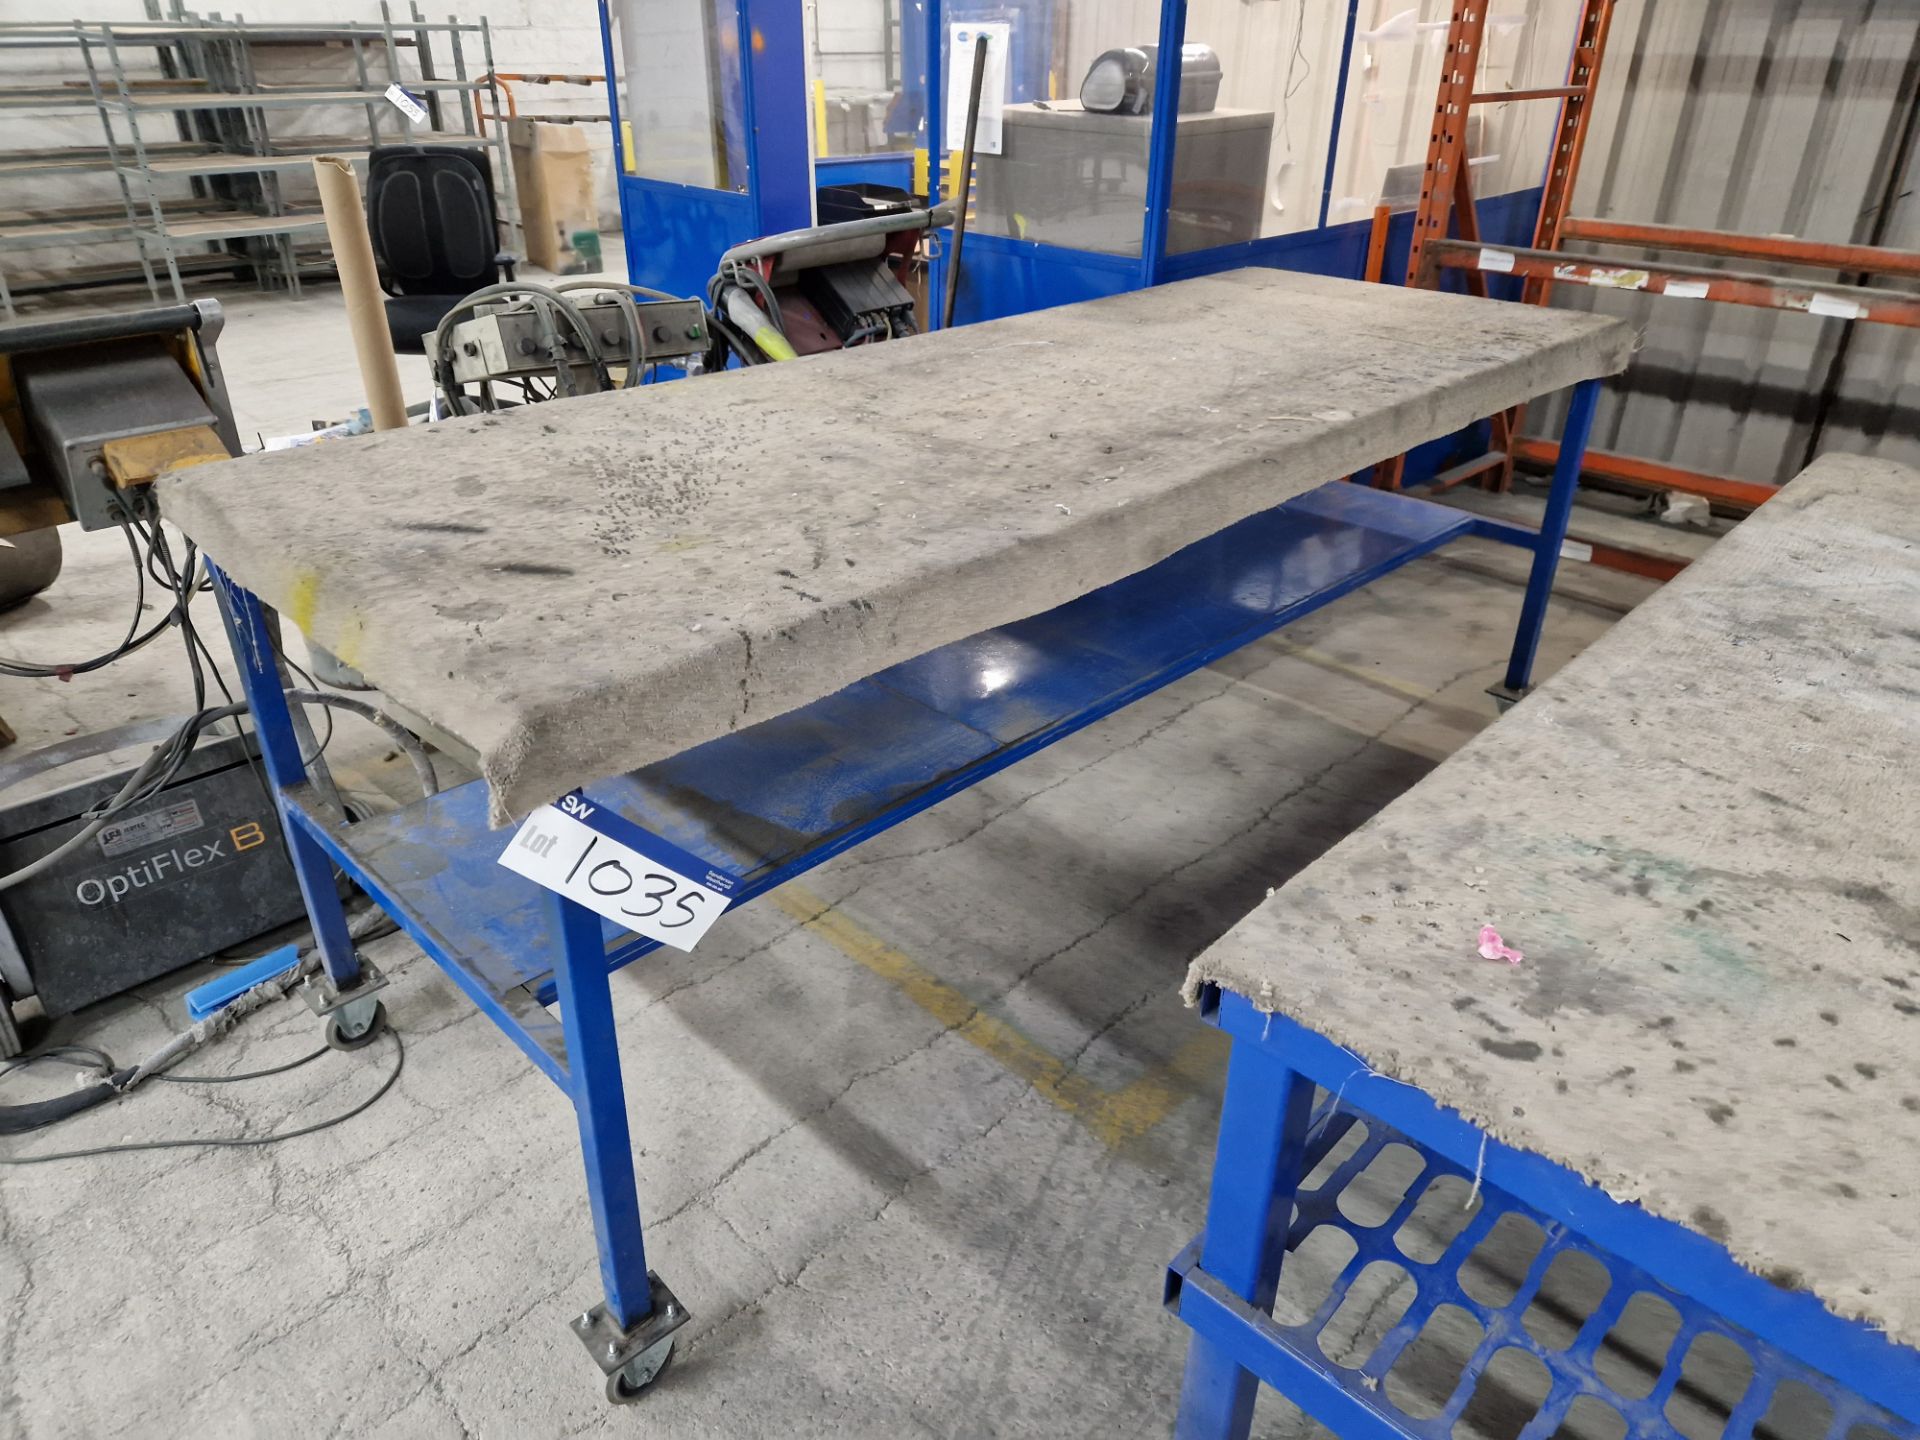 Two Tier Mobile Steel Table, Approx. 2.5m x 0.93m Please read the following important notes:- ***